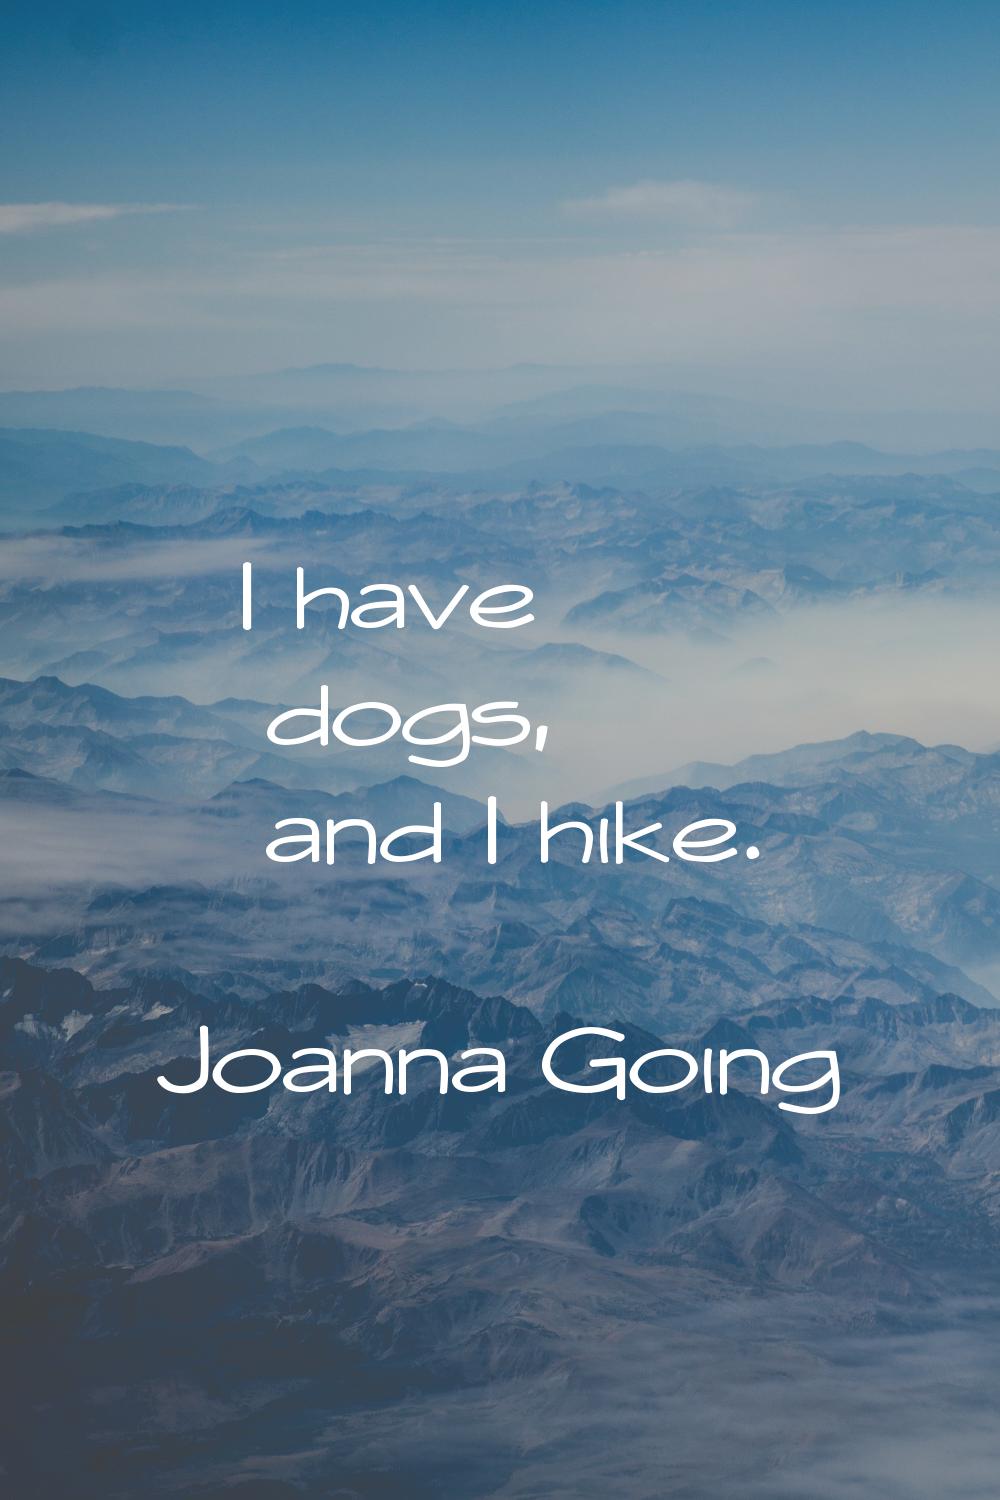 I have dogs, and I hike.